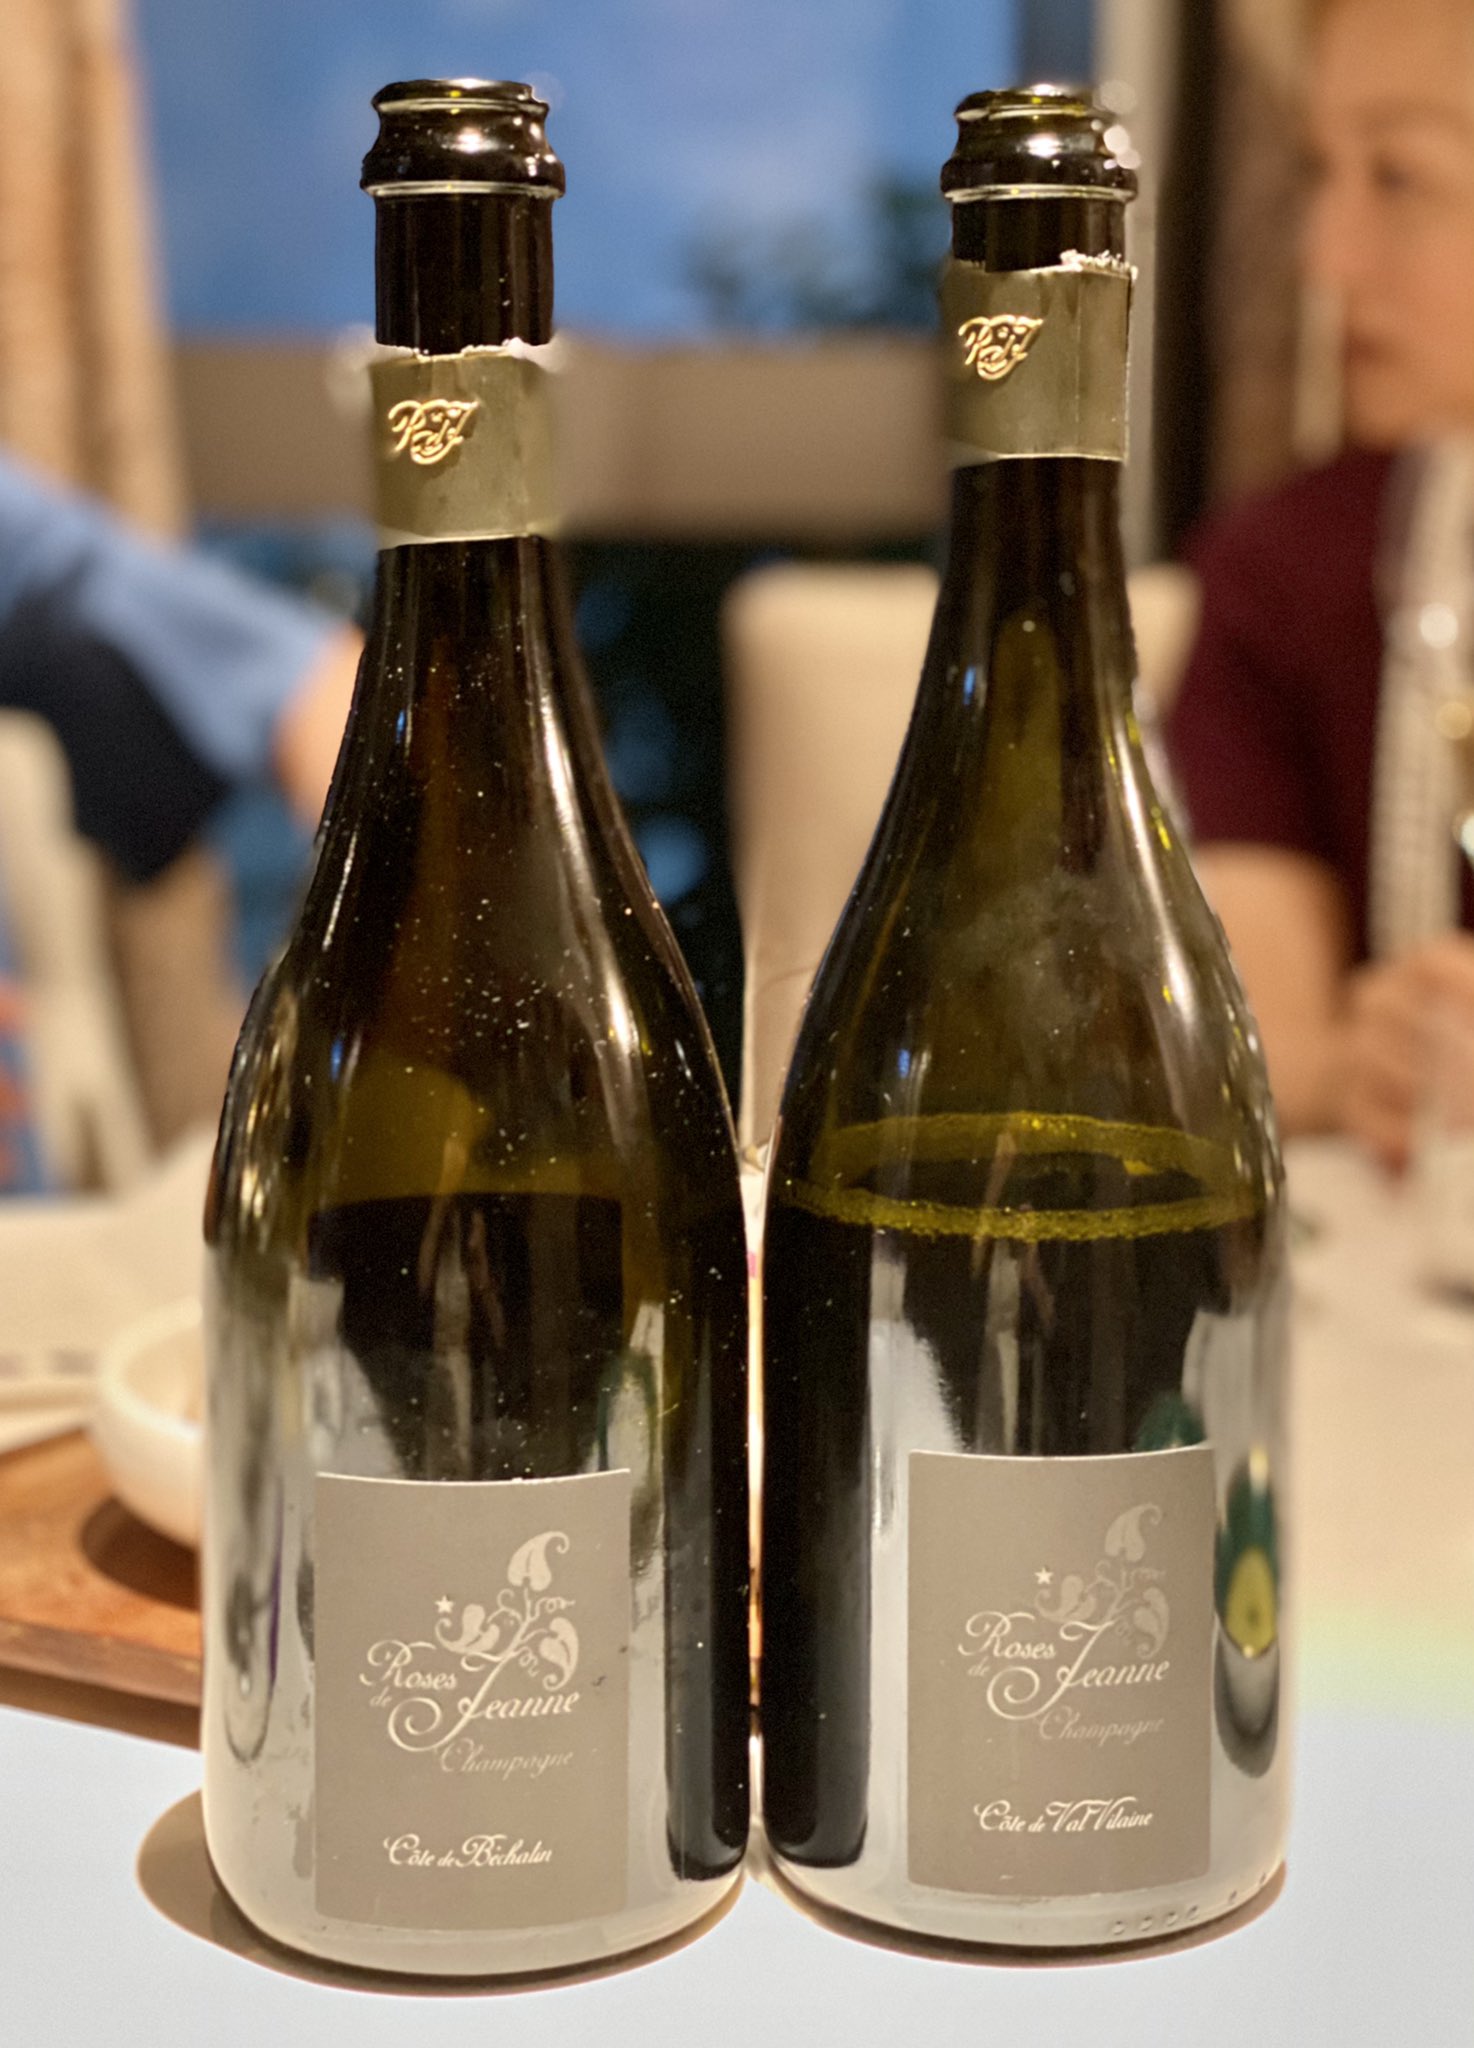 Jeannie Cho Lee MW on X: Two very cerebral champagnes by Cedric Bouchard  Roses de Jeanne; both opened up much more after some time in the glass!  #cedricbouchard #rosesdejeanne #champagne #wine #winetime #